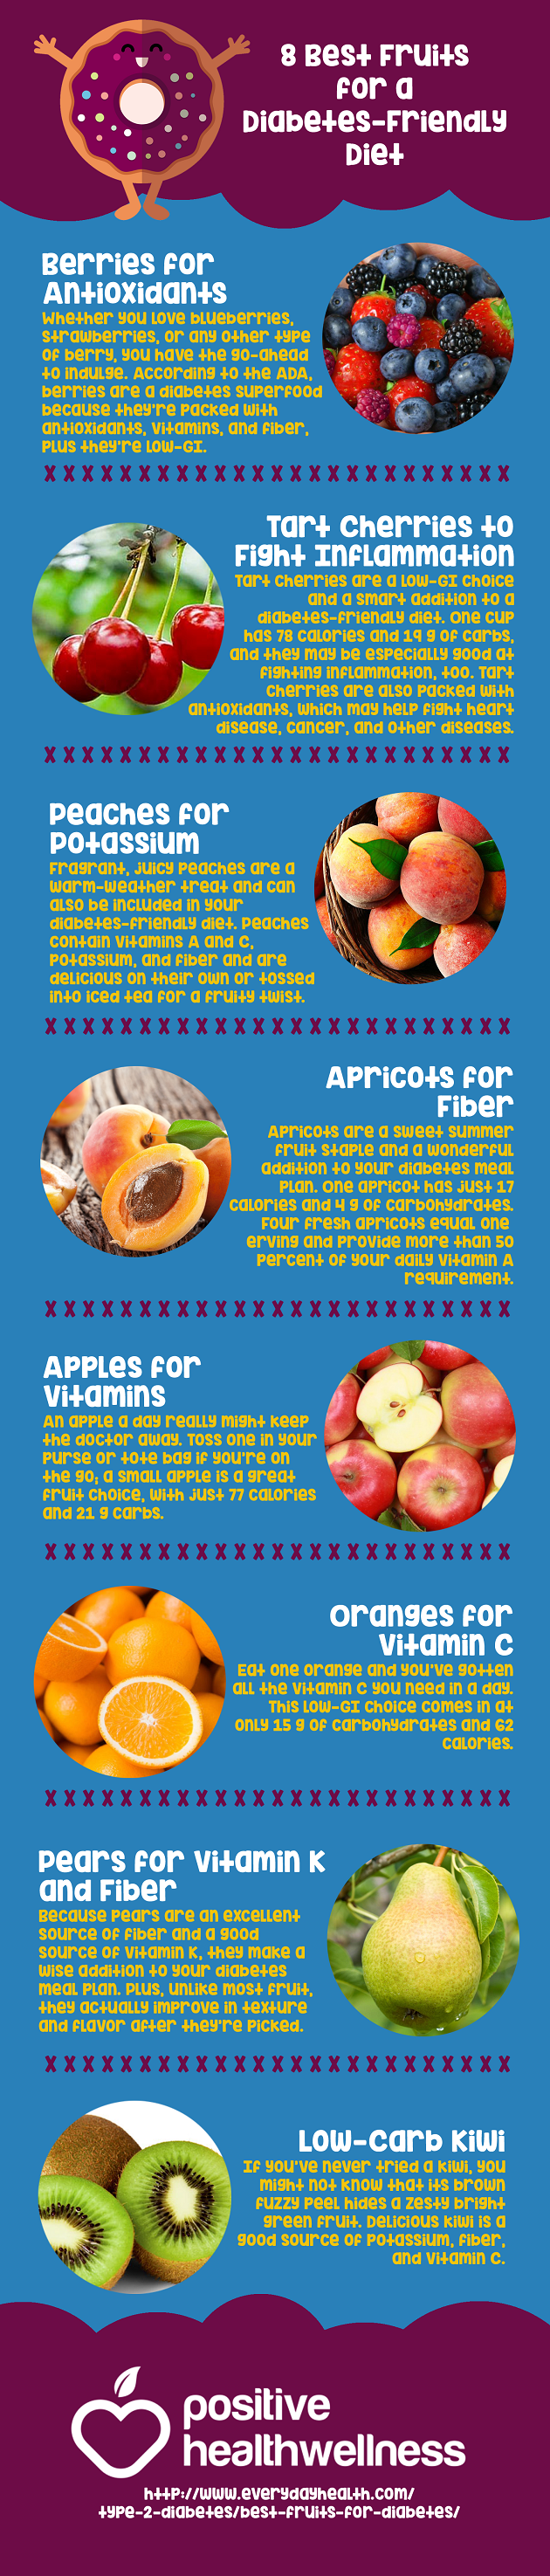 Top 8 Fruits To Include In A Diabetes-Friendly Diet Infographic